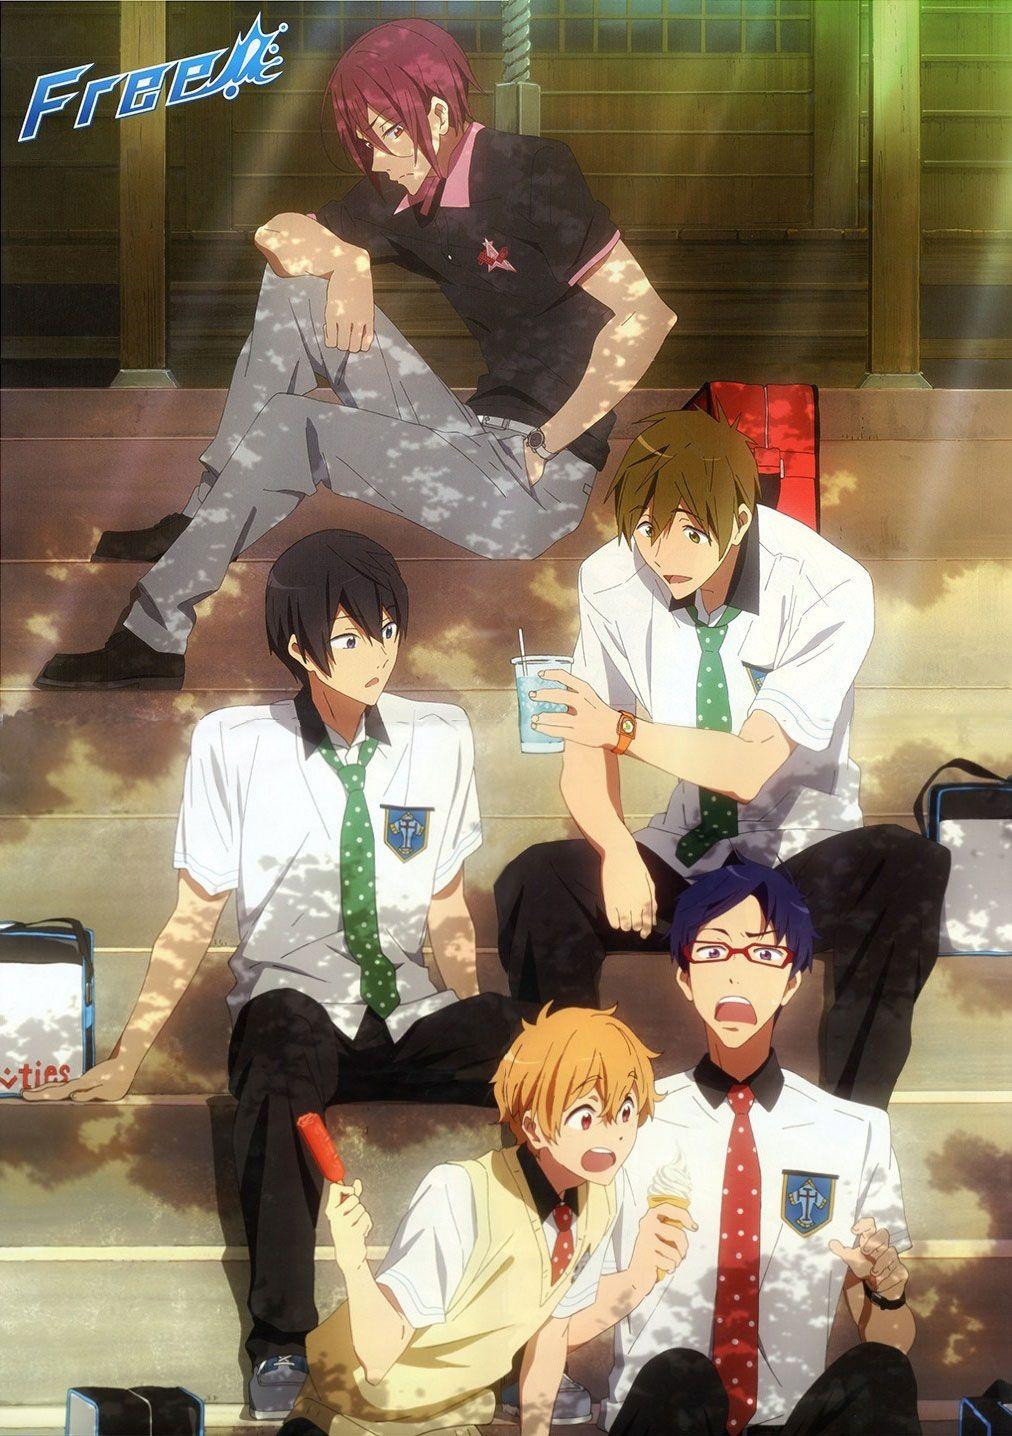 Free! Episode 10 of two butterflies